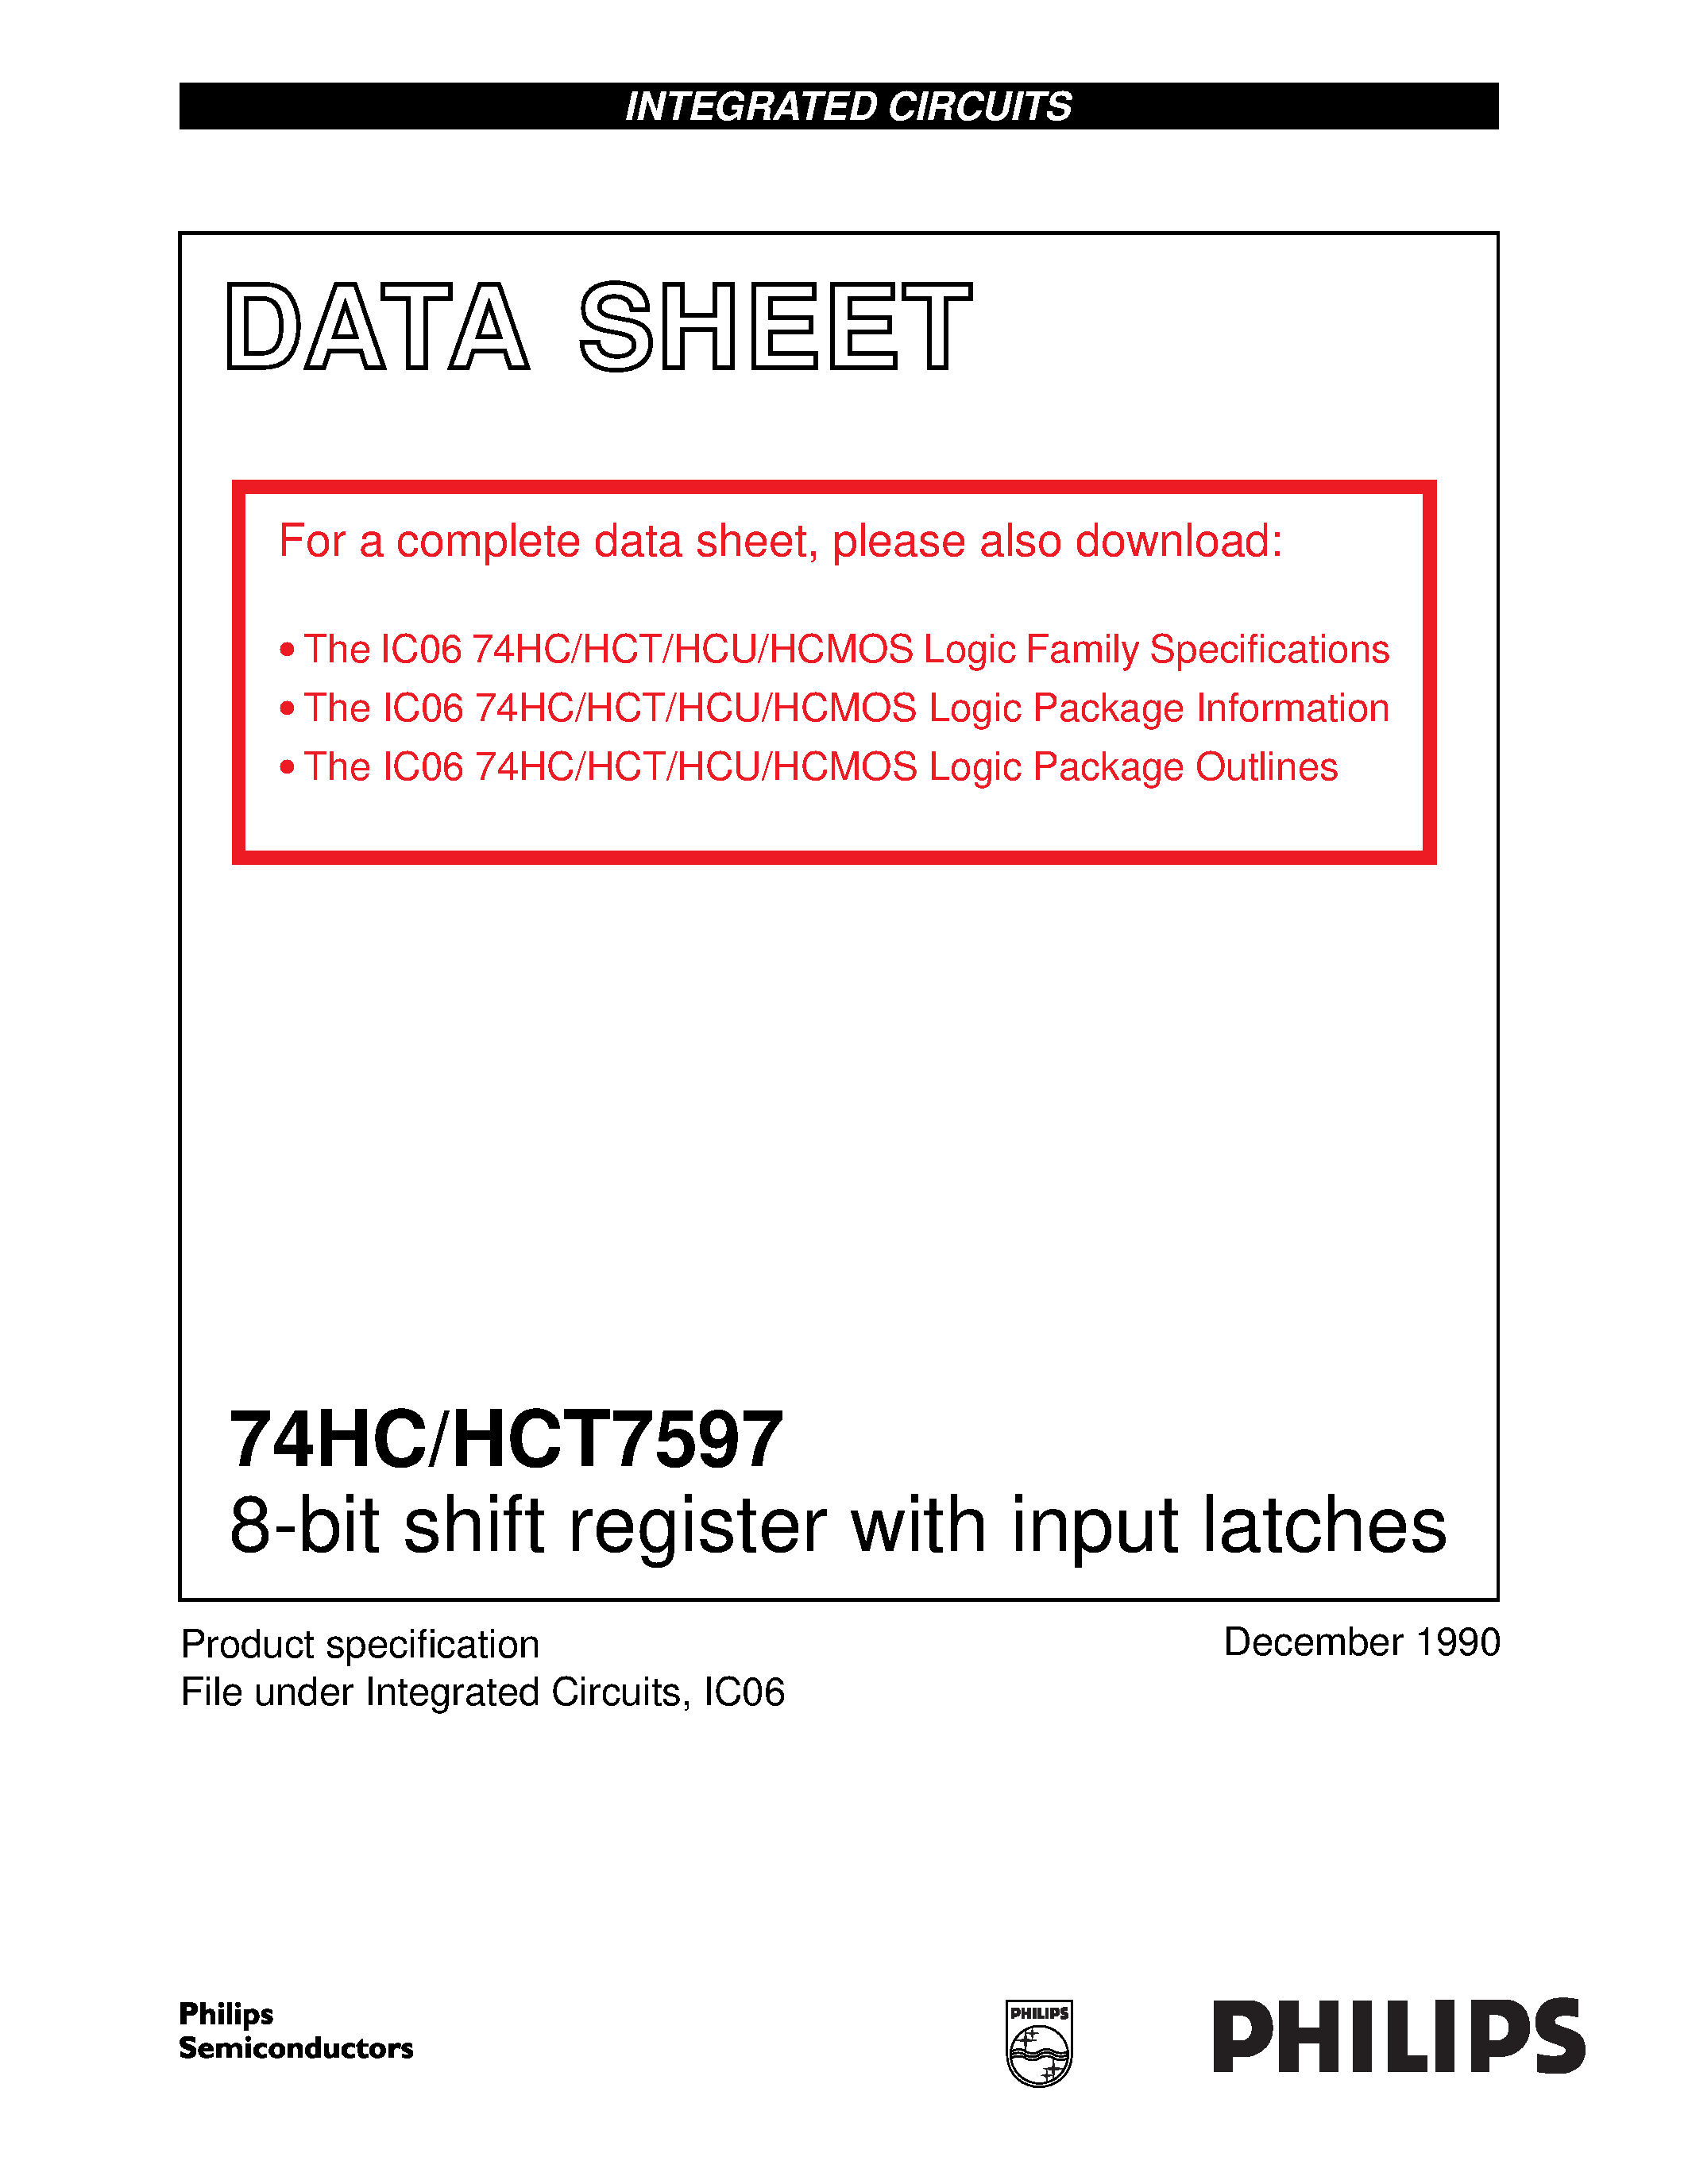 Datasheet 74HCT7597 - 8-bit shift register with input latches page 1